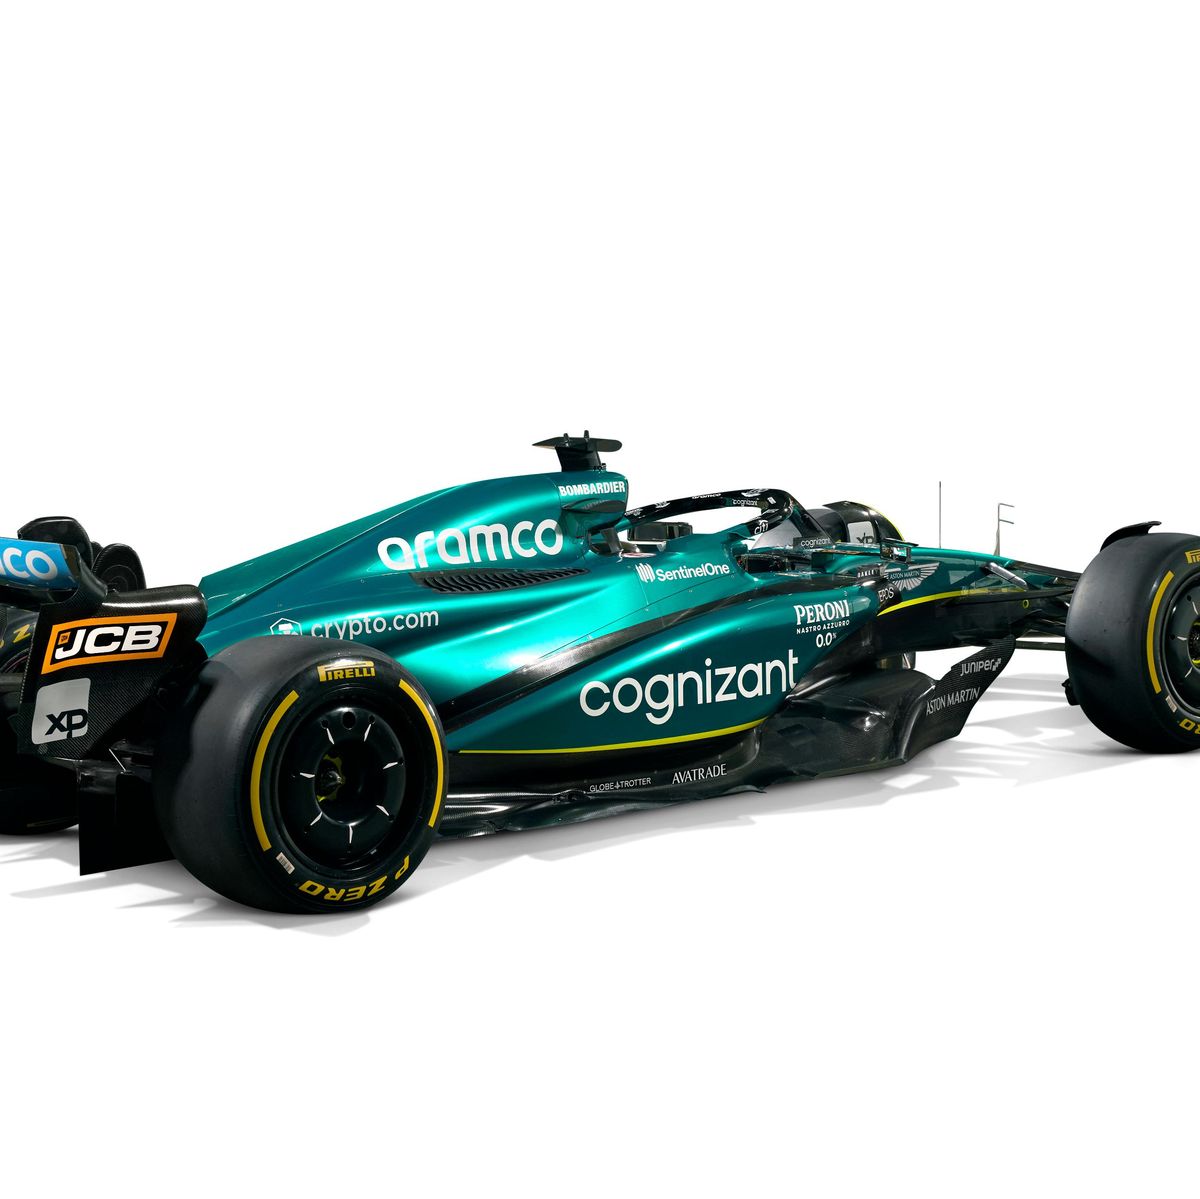 The key features of Aston Martin's 2022 F1 car